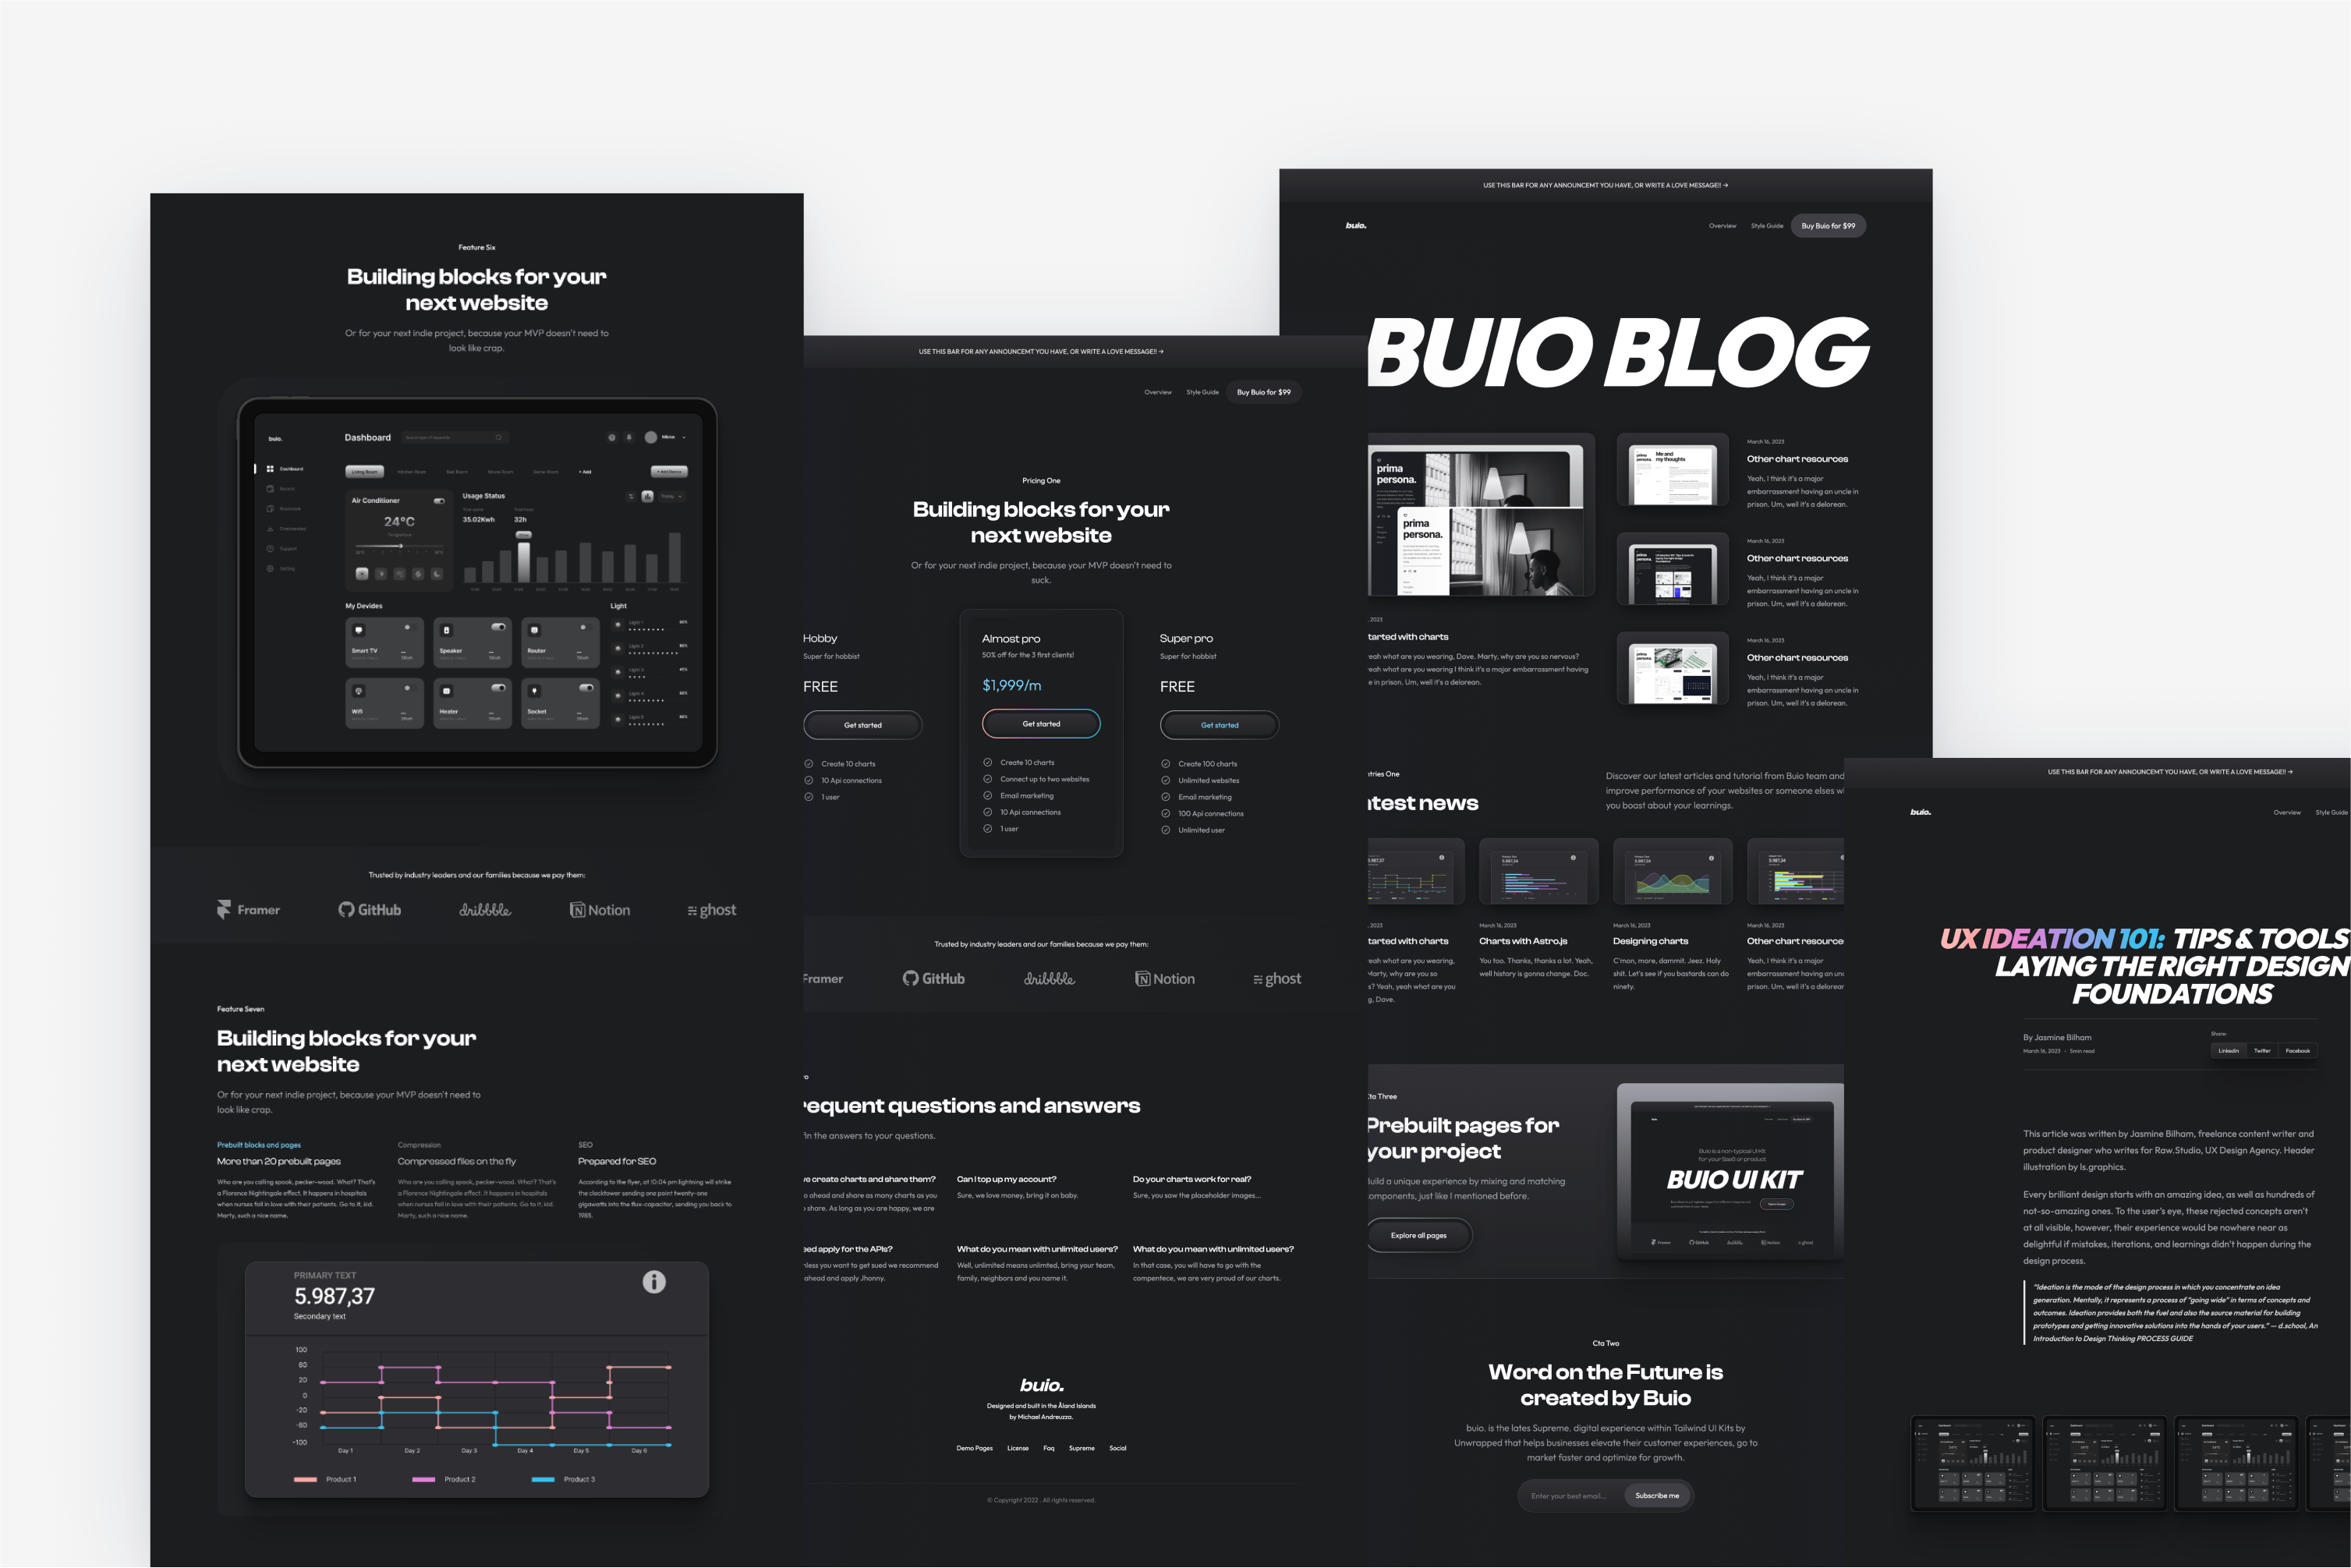 Buio is a beautifully design UI Kit that allows you to put together pages from different categories.